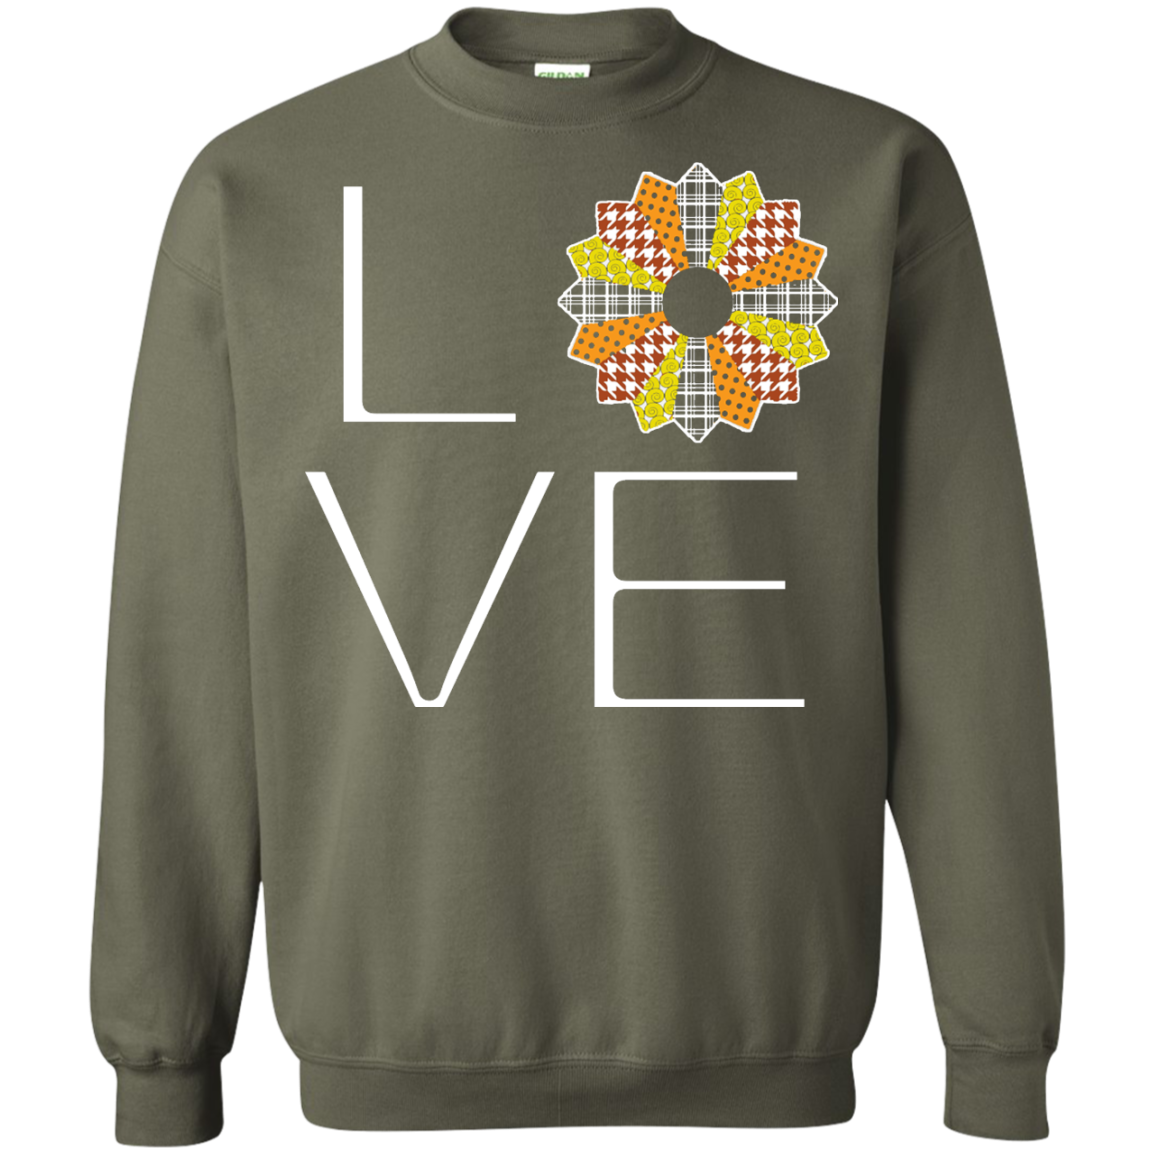 LOVE Quilting (Fall Colors) Crewneck Sweatshirts - Crafter4Life - 10